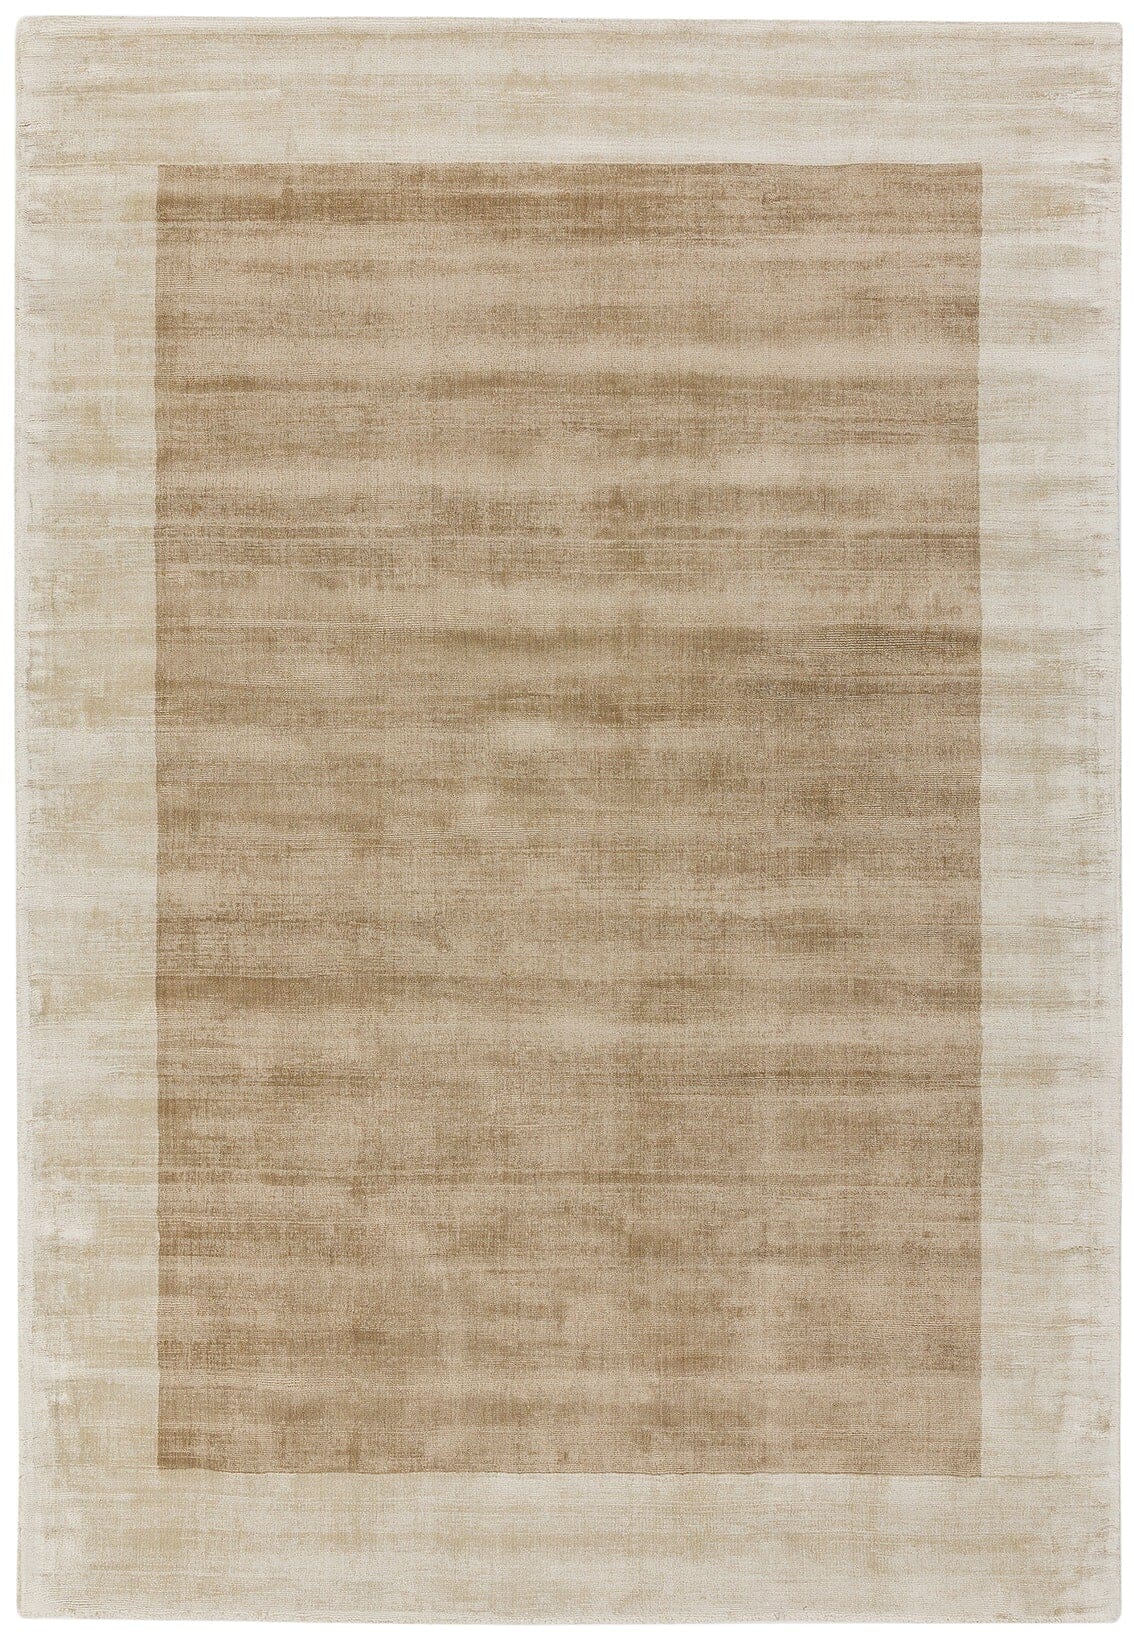  Asiatic Carpets-Asiatic Carpets Blade Hand Woven Rug Putty Champagne - 120 x 170cm-Beige, Natural 629 